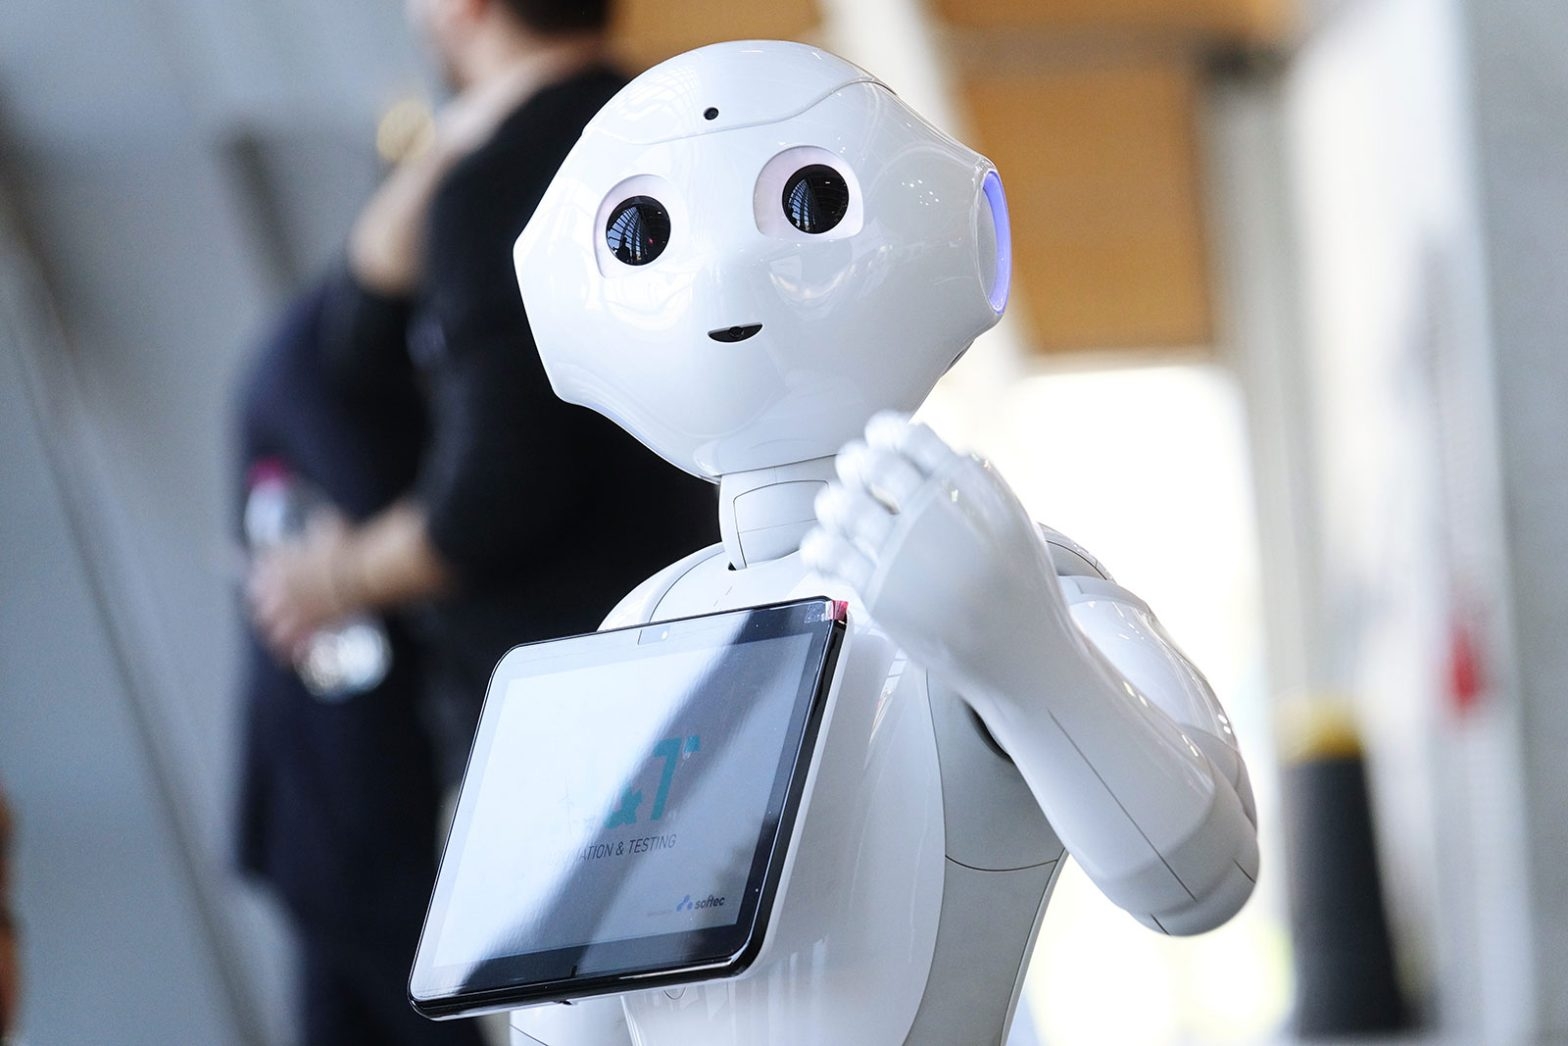 What to Expect from Industrial Applications of Humanoid Robotics